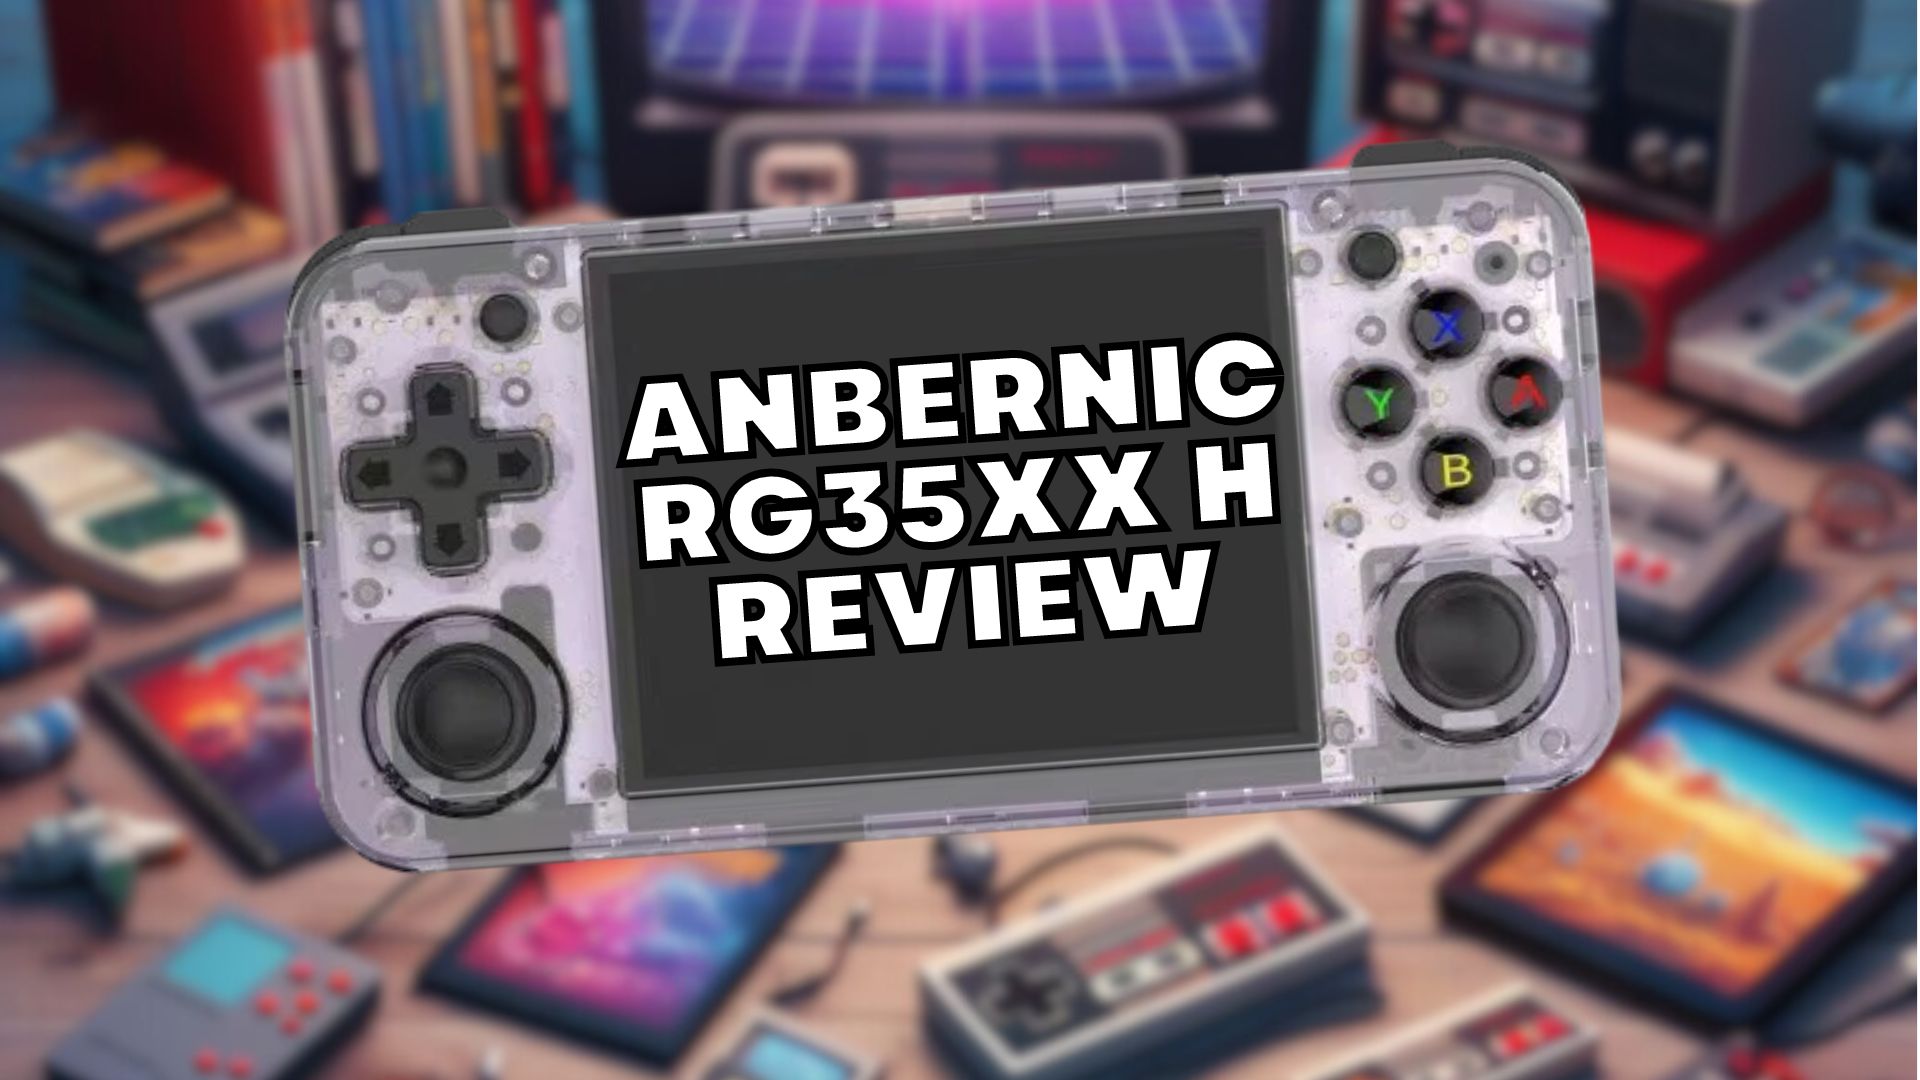 Anbernic RG35XX H Review – Great budget retro gaming handheld